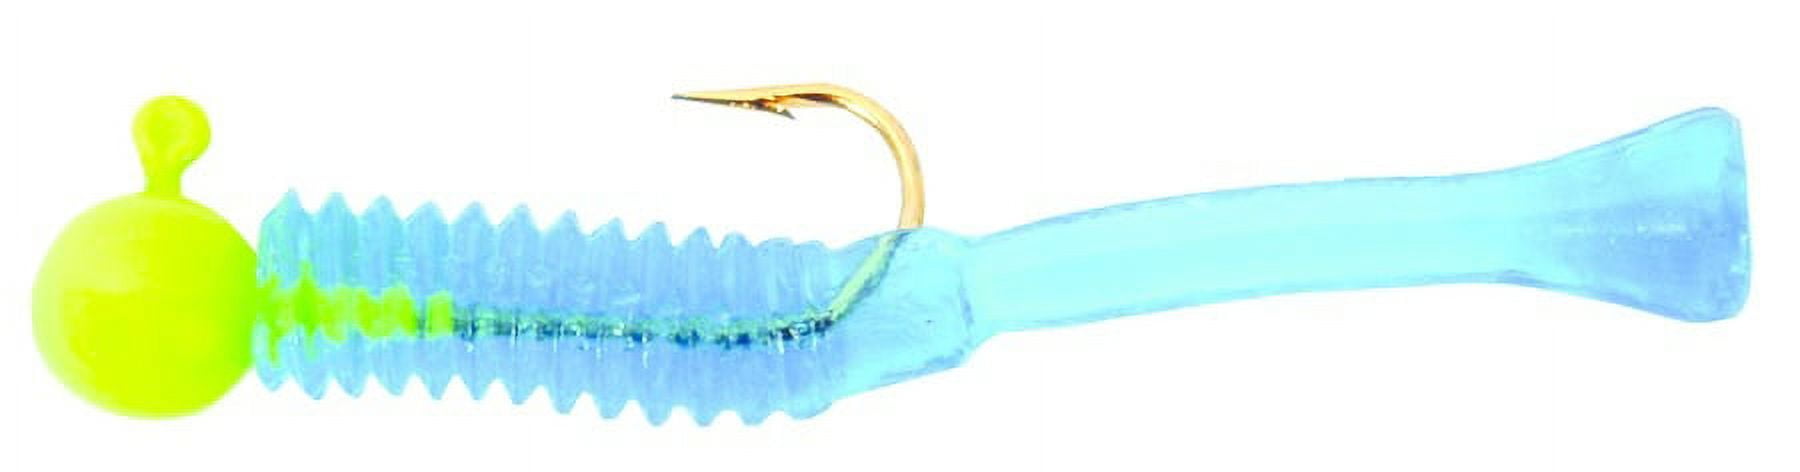 Cubby 5014 Mini-Mite Jig 1 1/2 1/32 oz Size 8 Hook Green And Blue